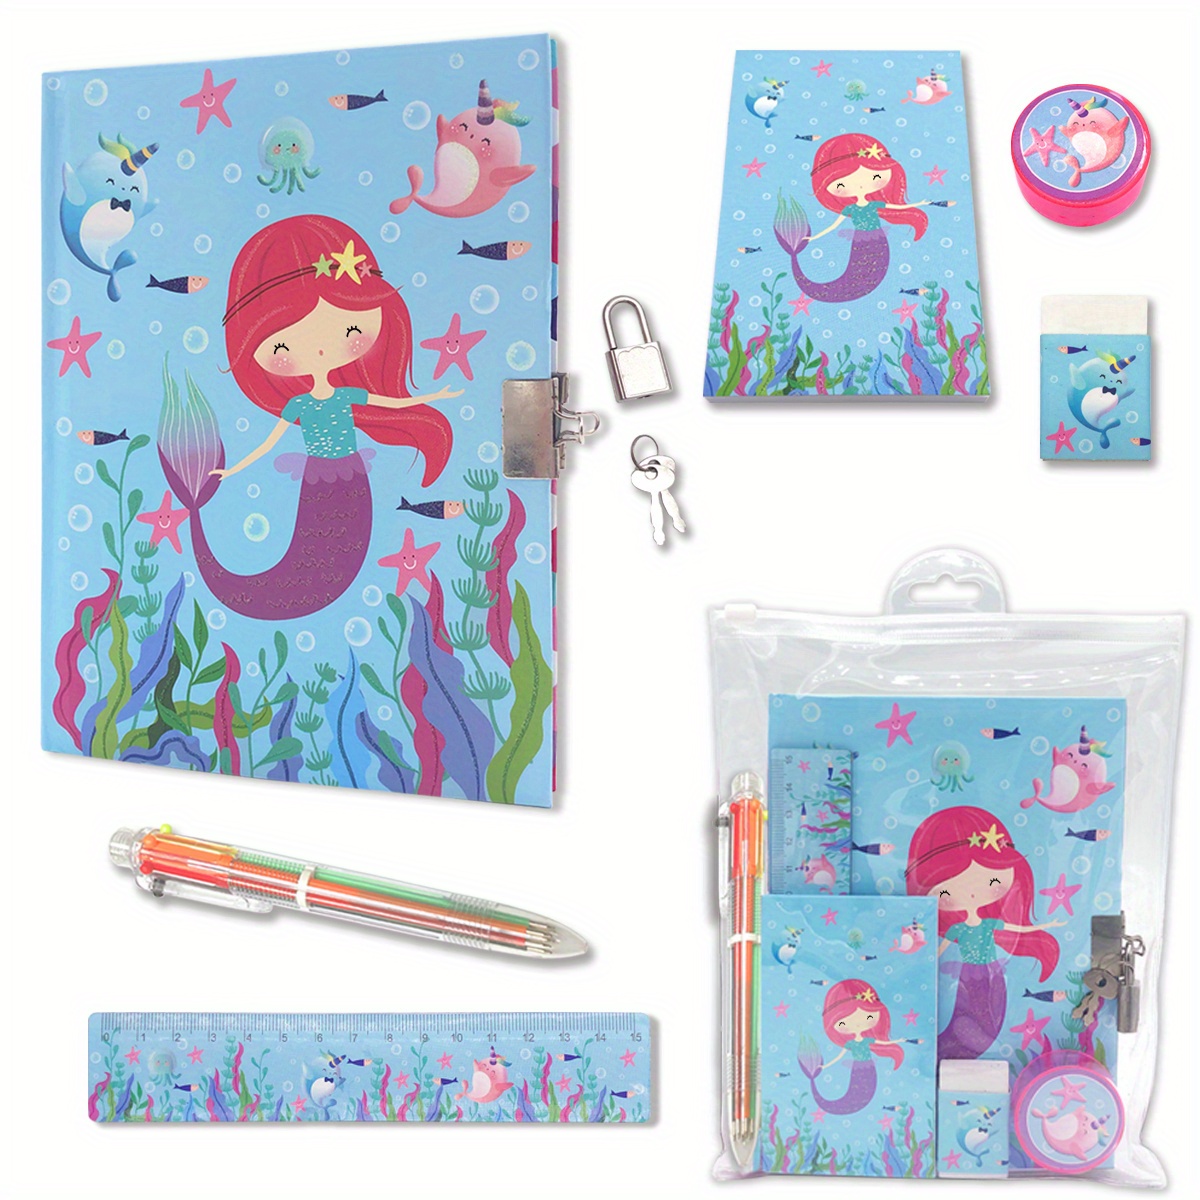 Diary with Lock Gift Set for Girls ages 8-12, Marble PU Leather 300 Pages  Kids Journals for Writing, Drawing Notebook with Lock Includes Combination